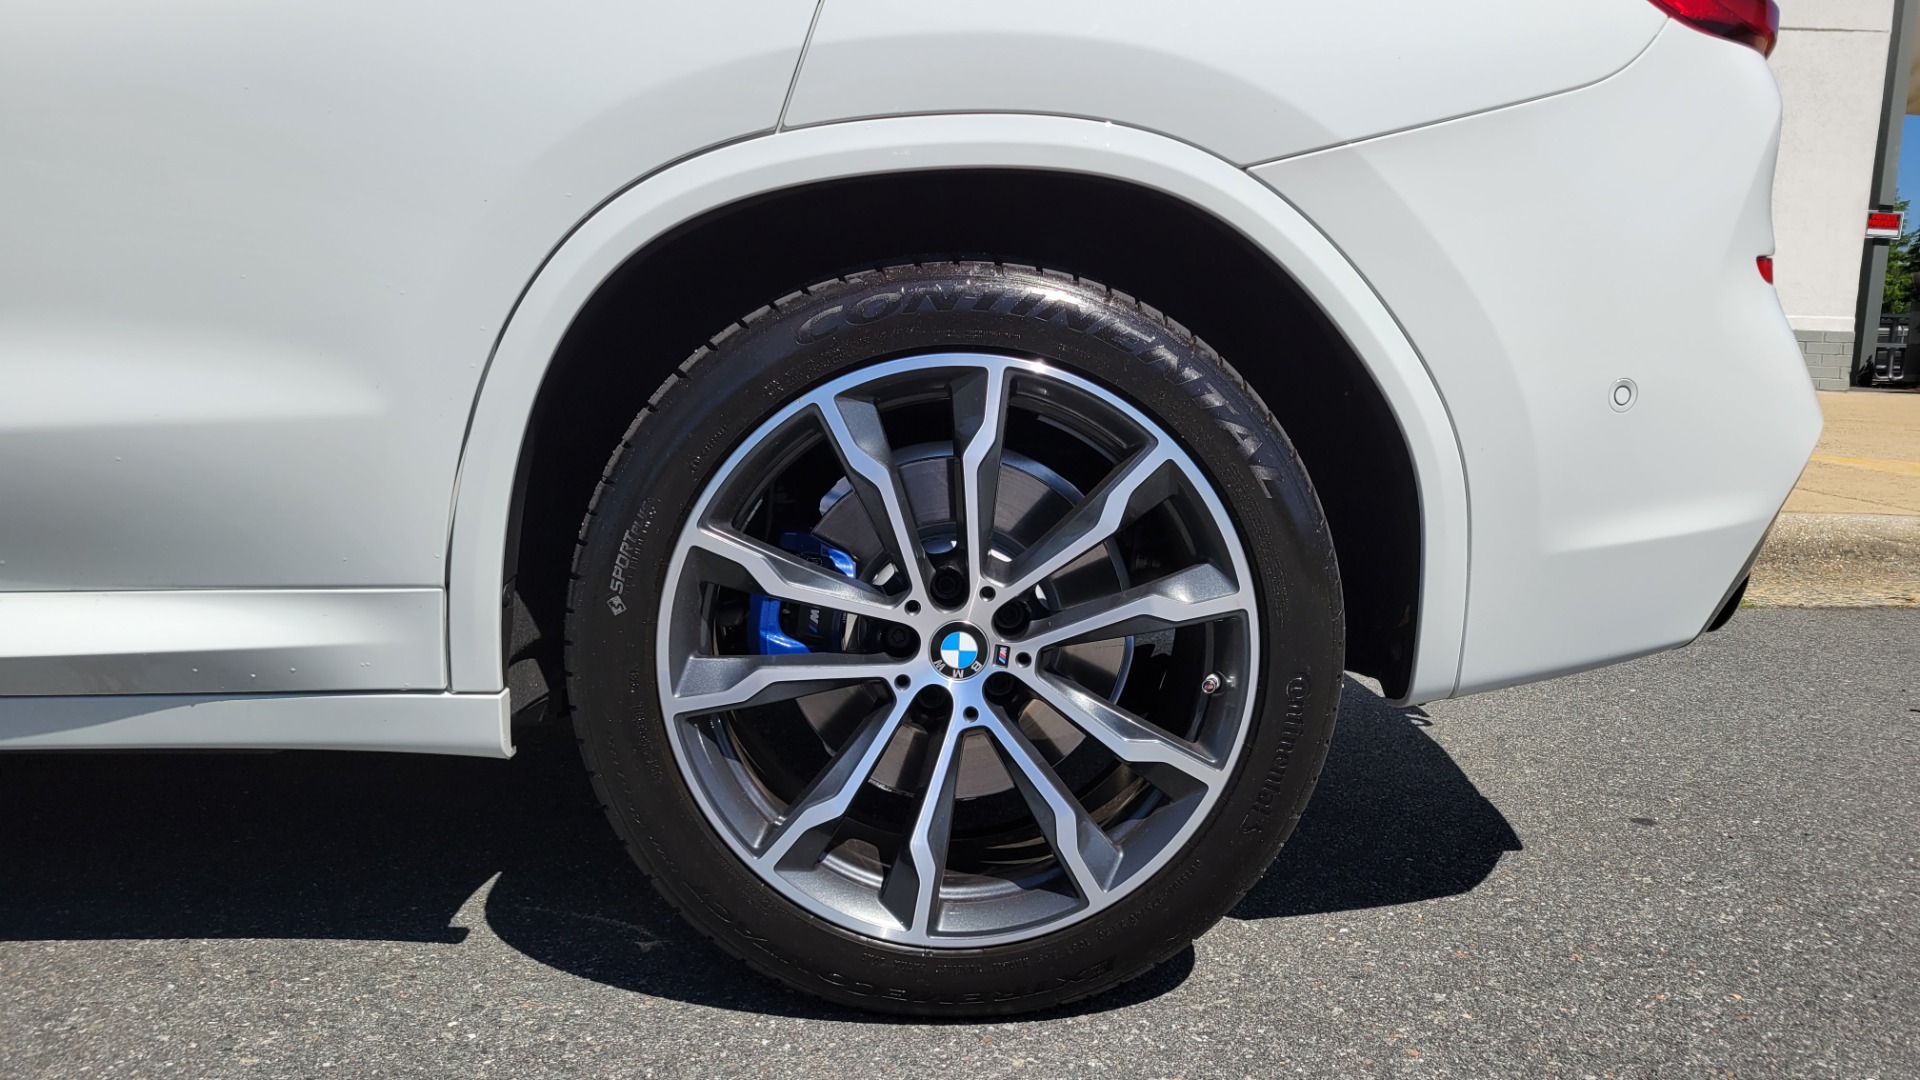 Used 2020 BMW X3 M40I EXECUTIVE PKG / DRVR ASST PLUS / H/K SND / HITCH / REARVIEW for sale $55,995 at Formula Imports in Charlotte NC 28227 88